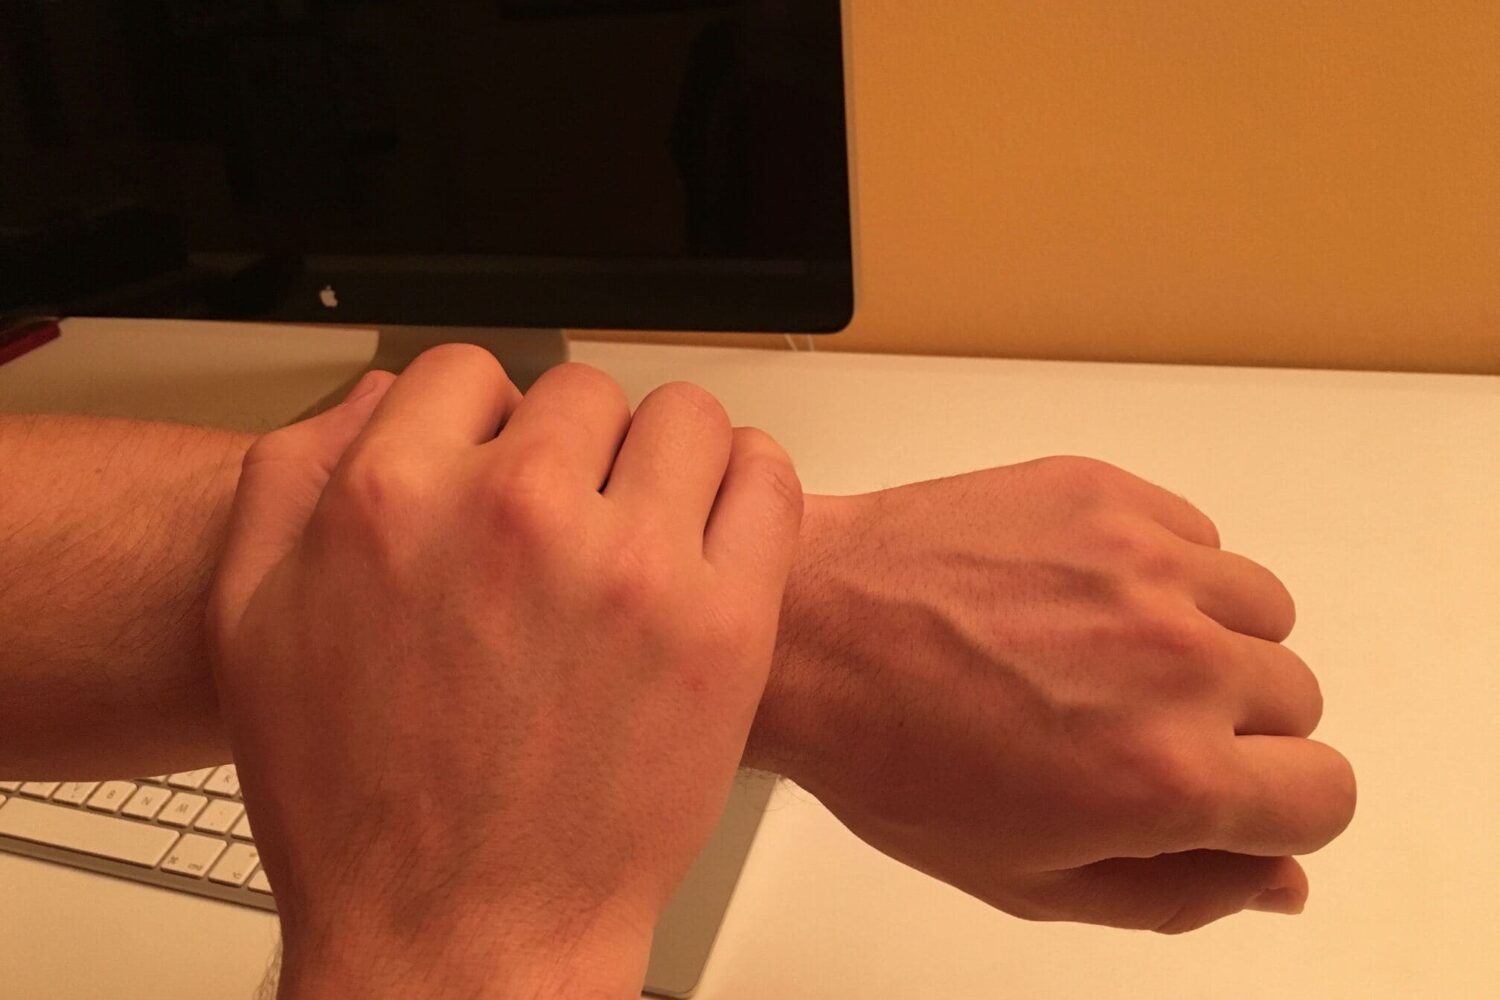 Covering Apple Watch with a palm to mute notifications and alarms